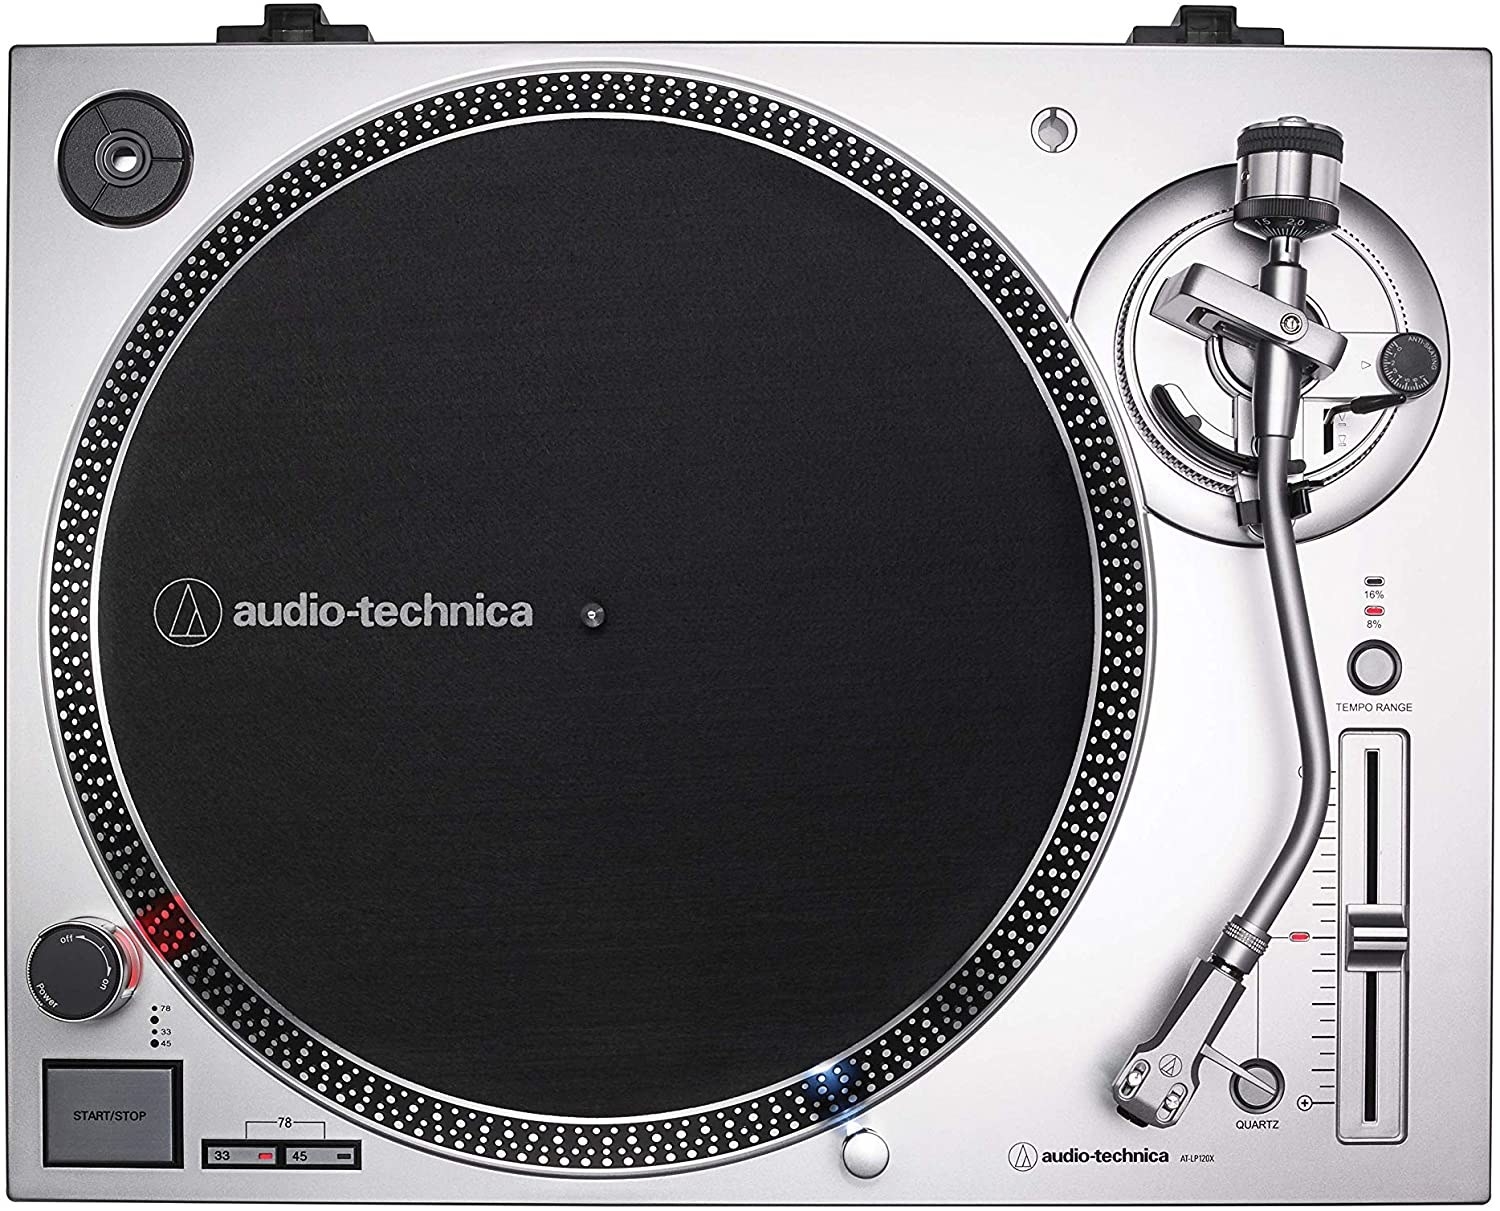 A silver turntable with a black platter mat